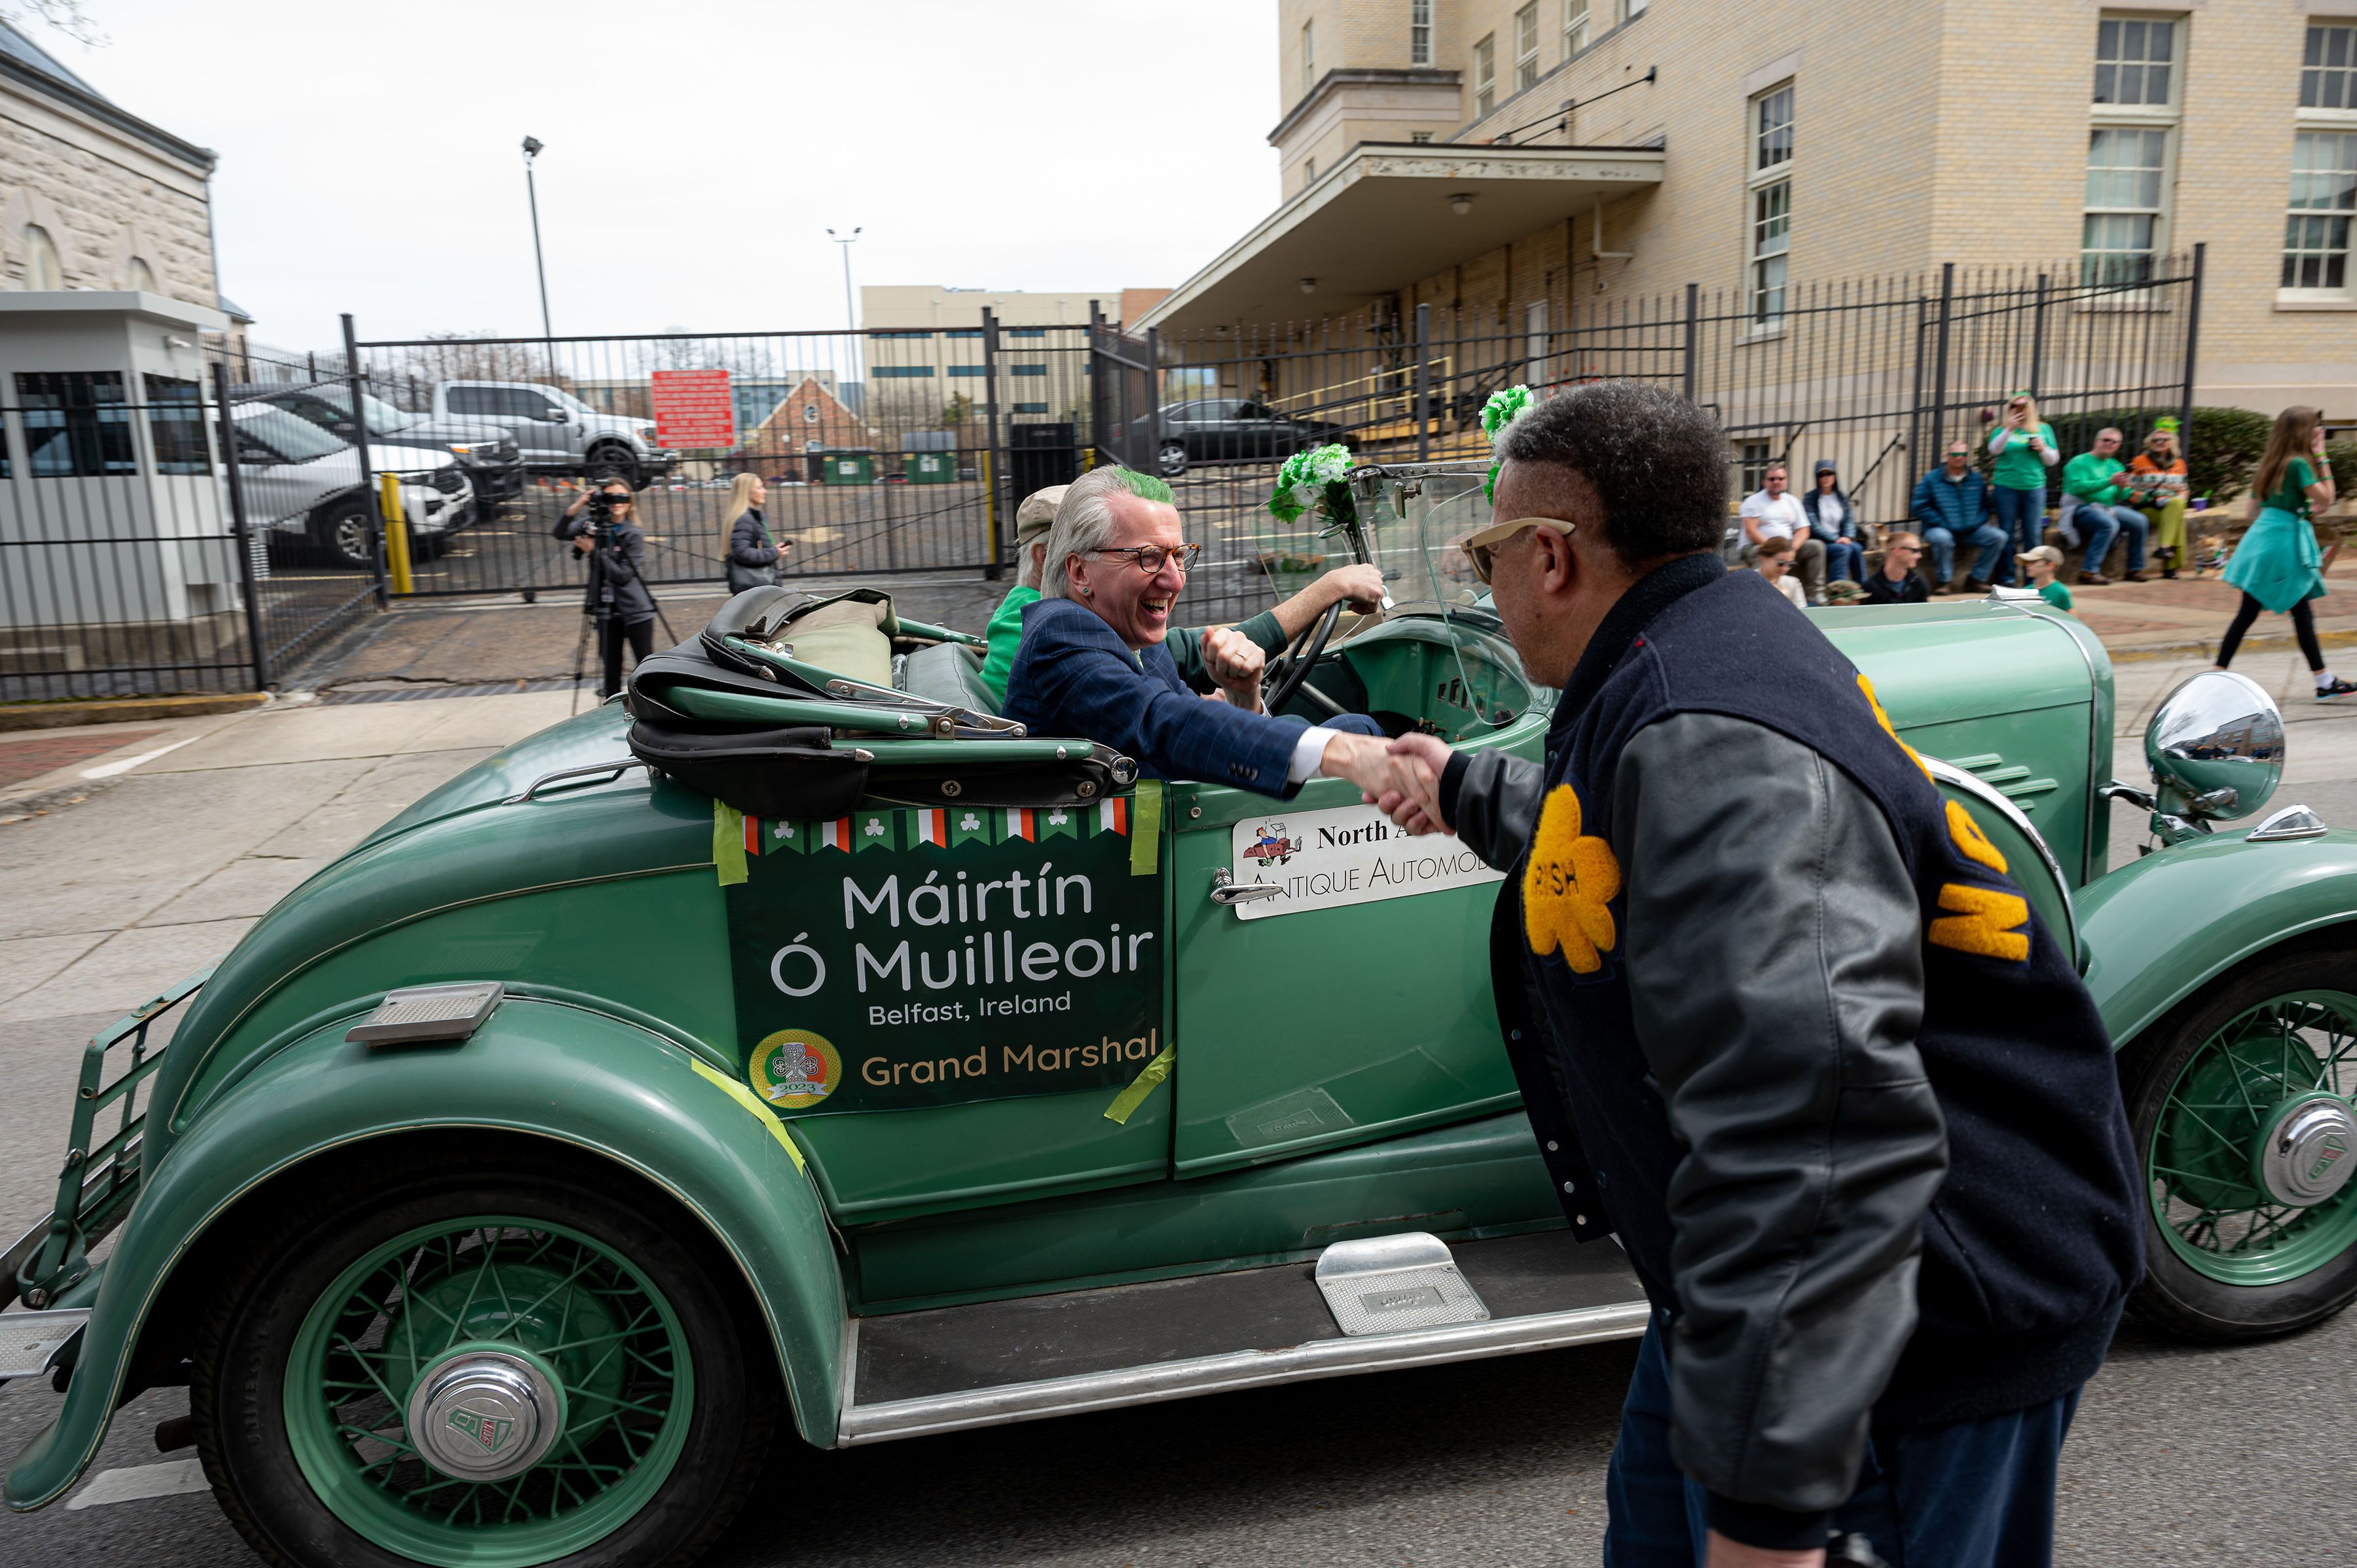 TOOT-TOOT: Soaking up the attention and the rays at the Huntsville, Alabama, St Patrick\'s Day parade as Sonnie Hereford, civil rights icon and parade stalwart, shakes my hand.